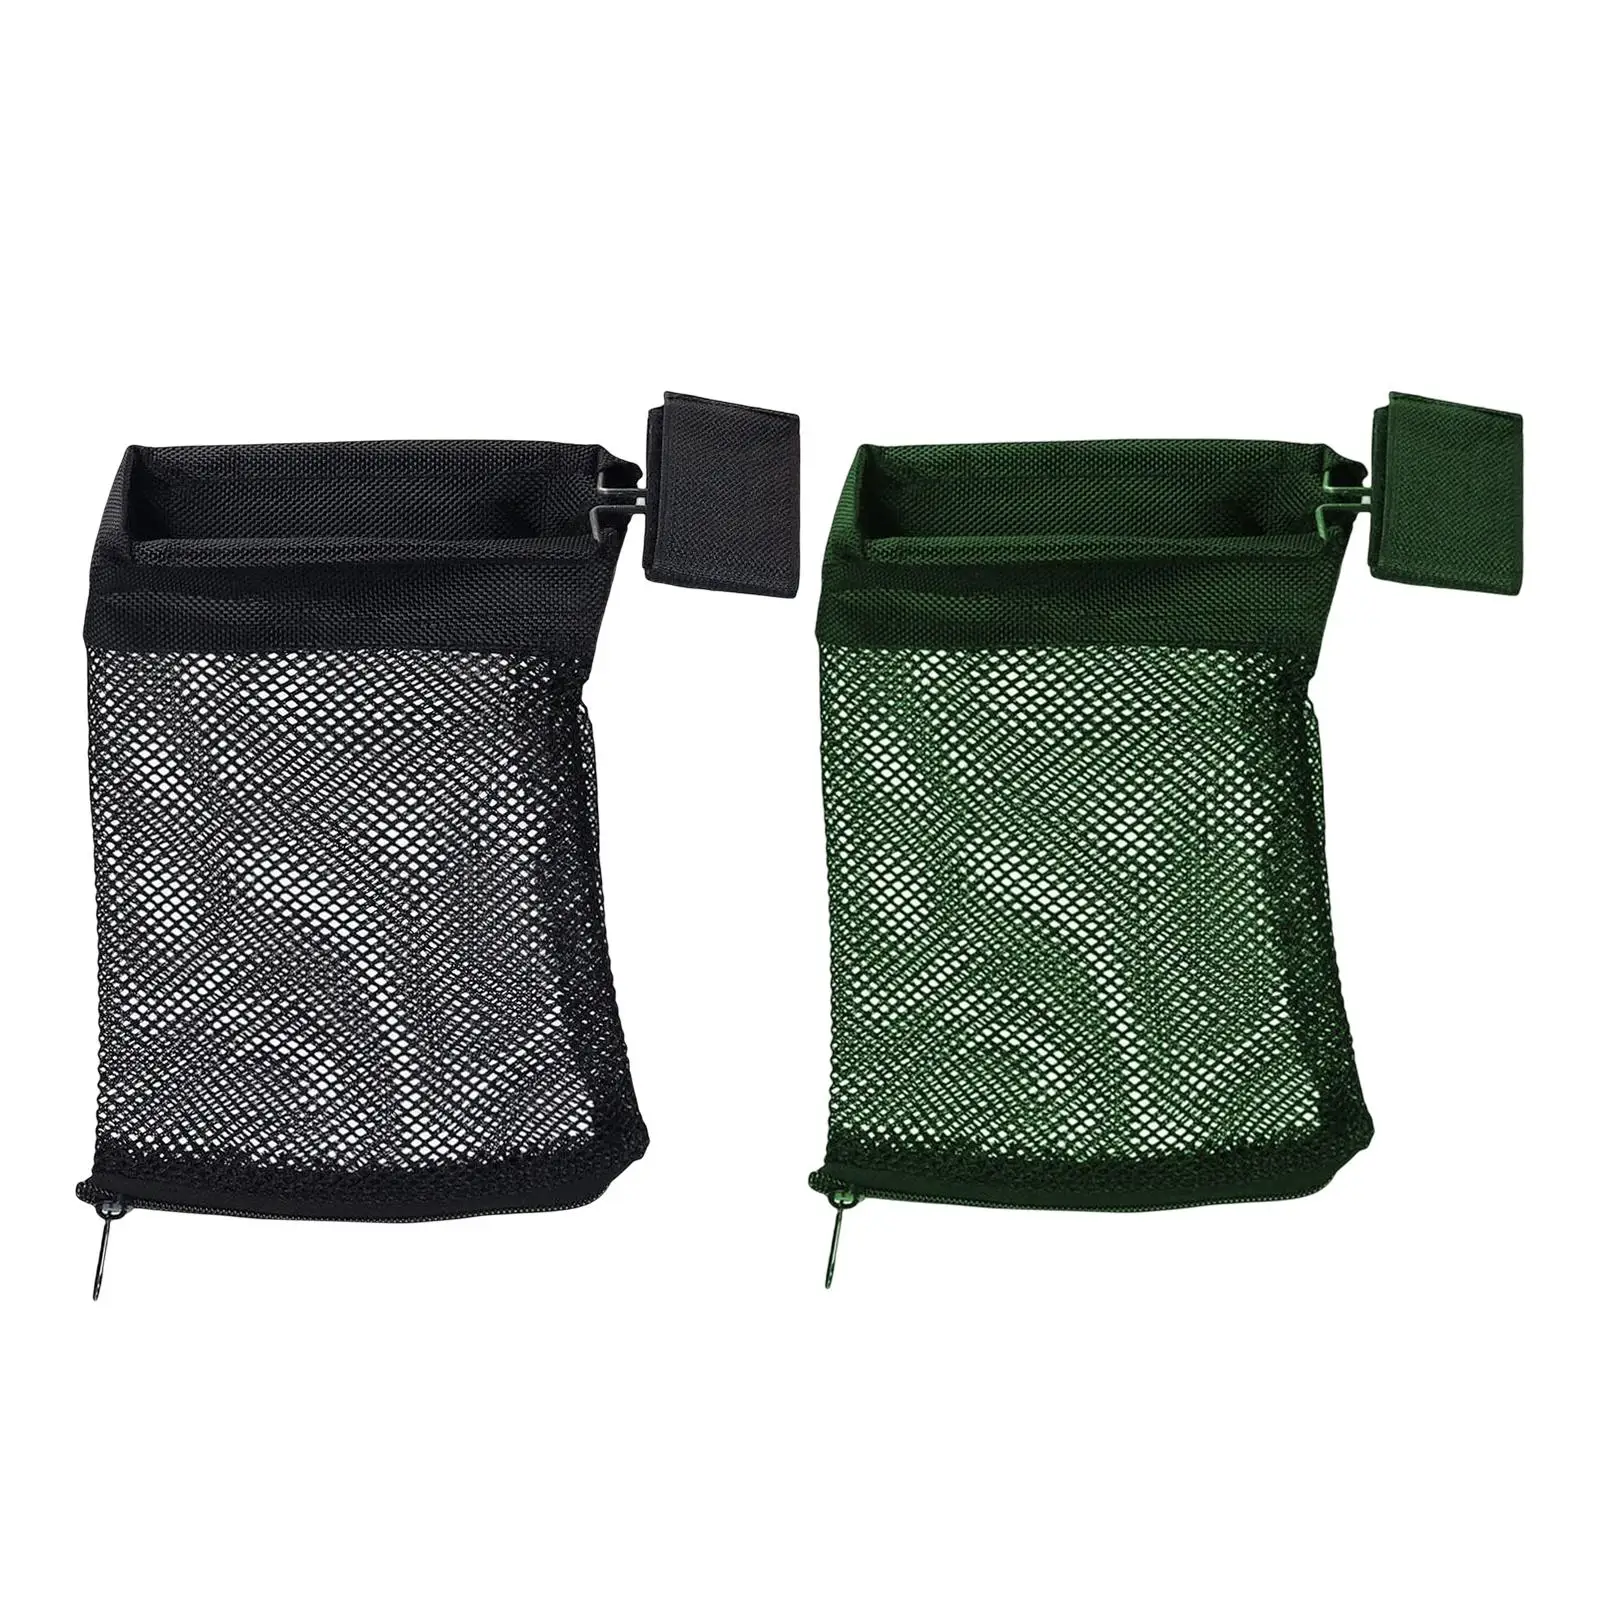 Mesh Recycling Bag Cosmetic Pouch Collector Container Holder Lightweight Travel Case Storage Bags for Camping Outdoor Indoor